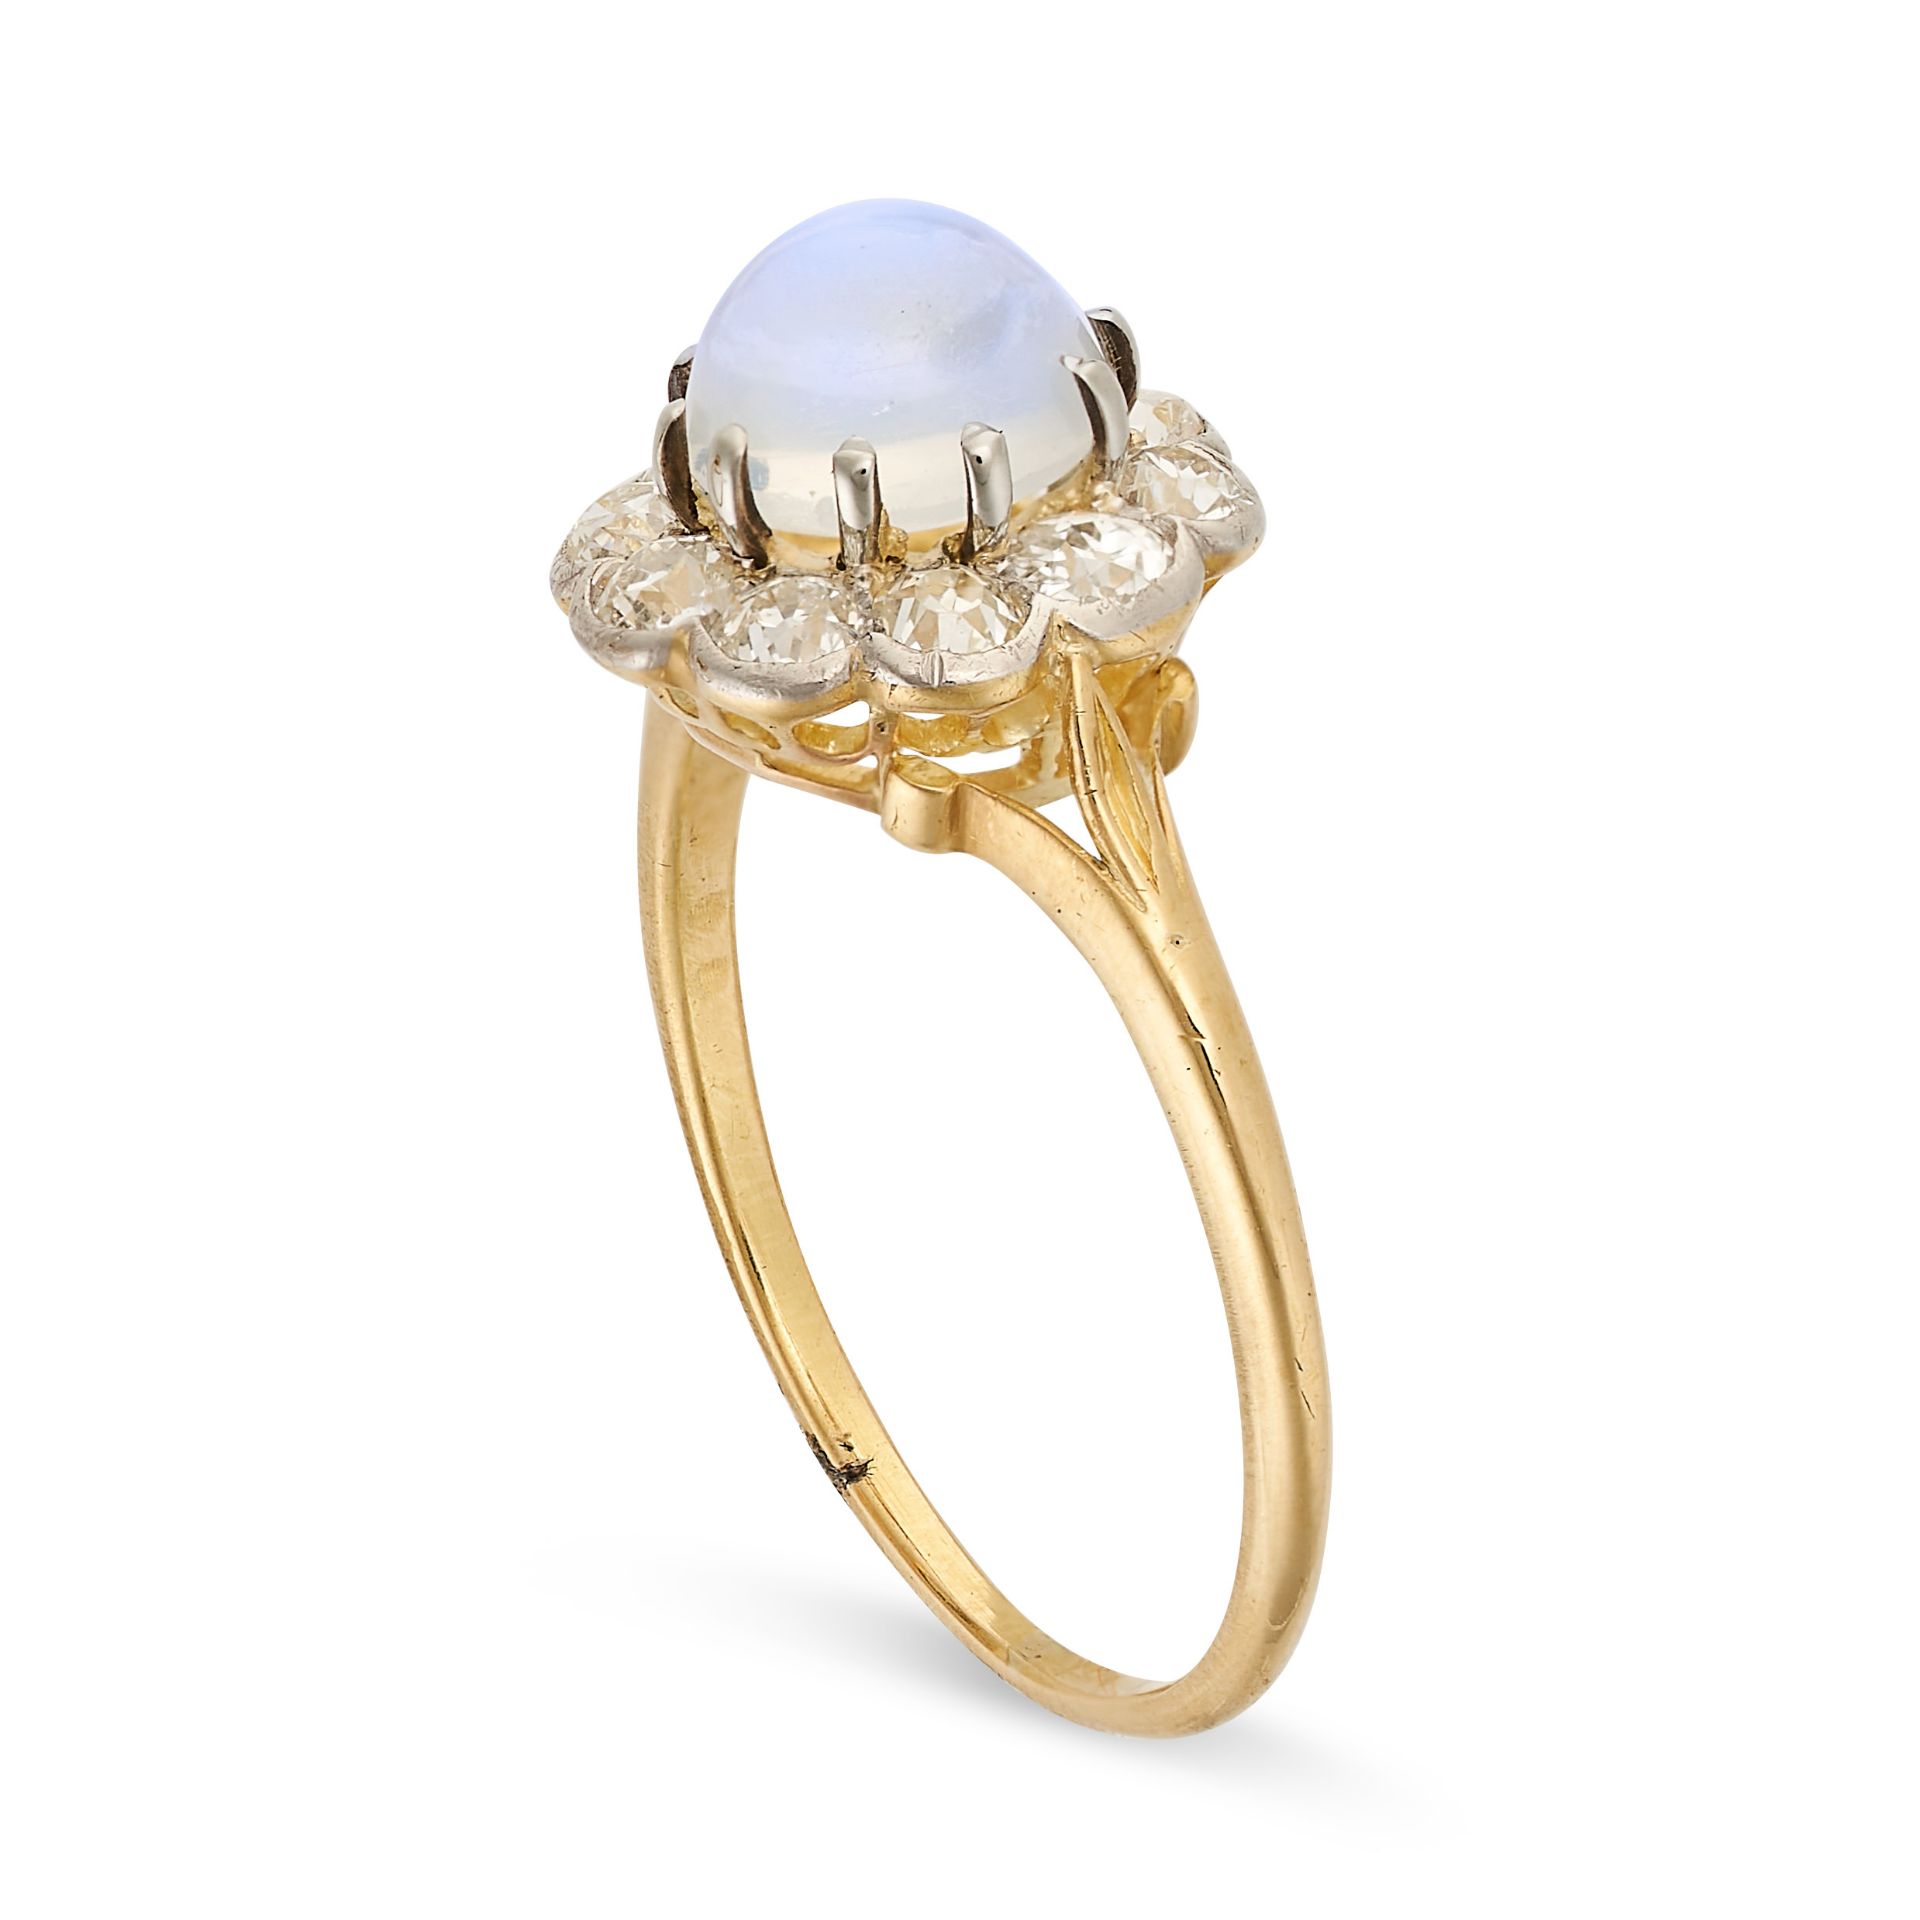 AN ANTIQUE MOONSTONE AND DIAMOND DRESS RING in high carat yellow gold, set with a round cabochon - Image 2 of 2